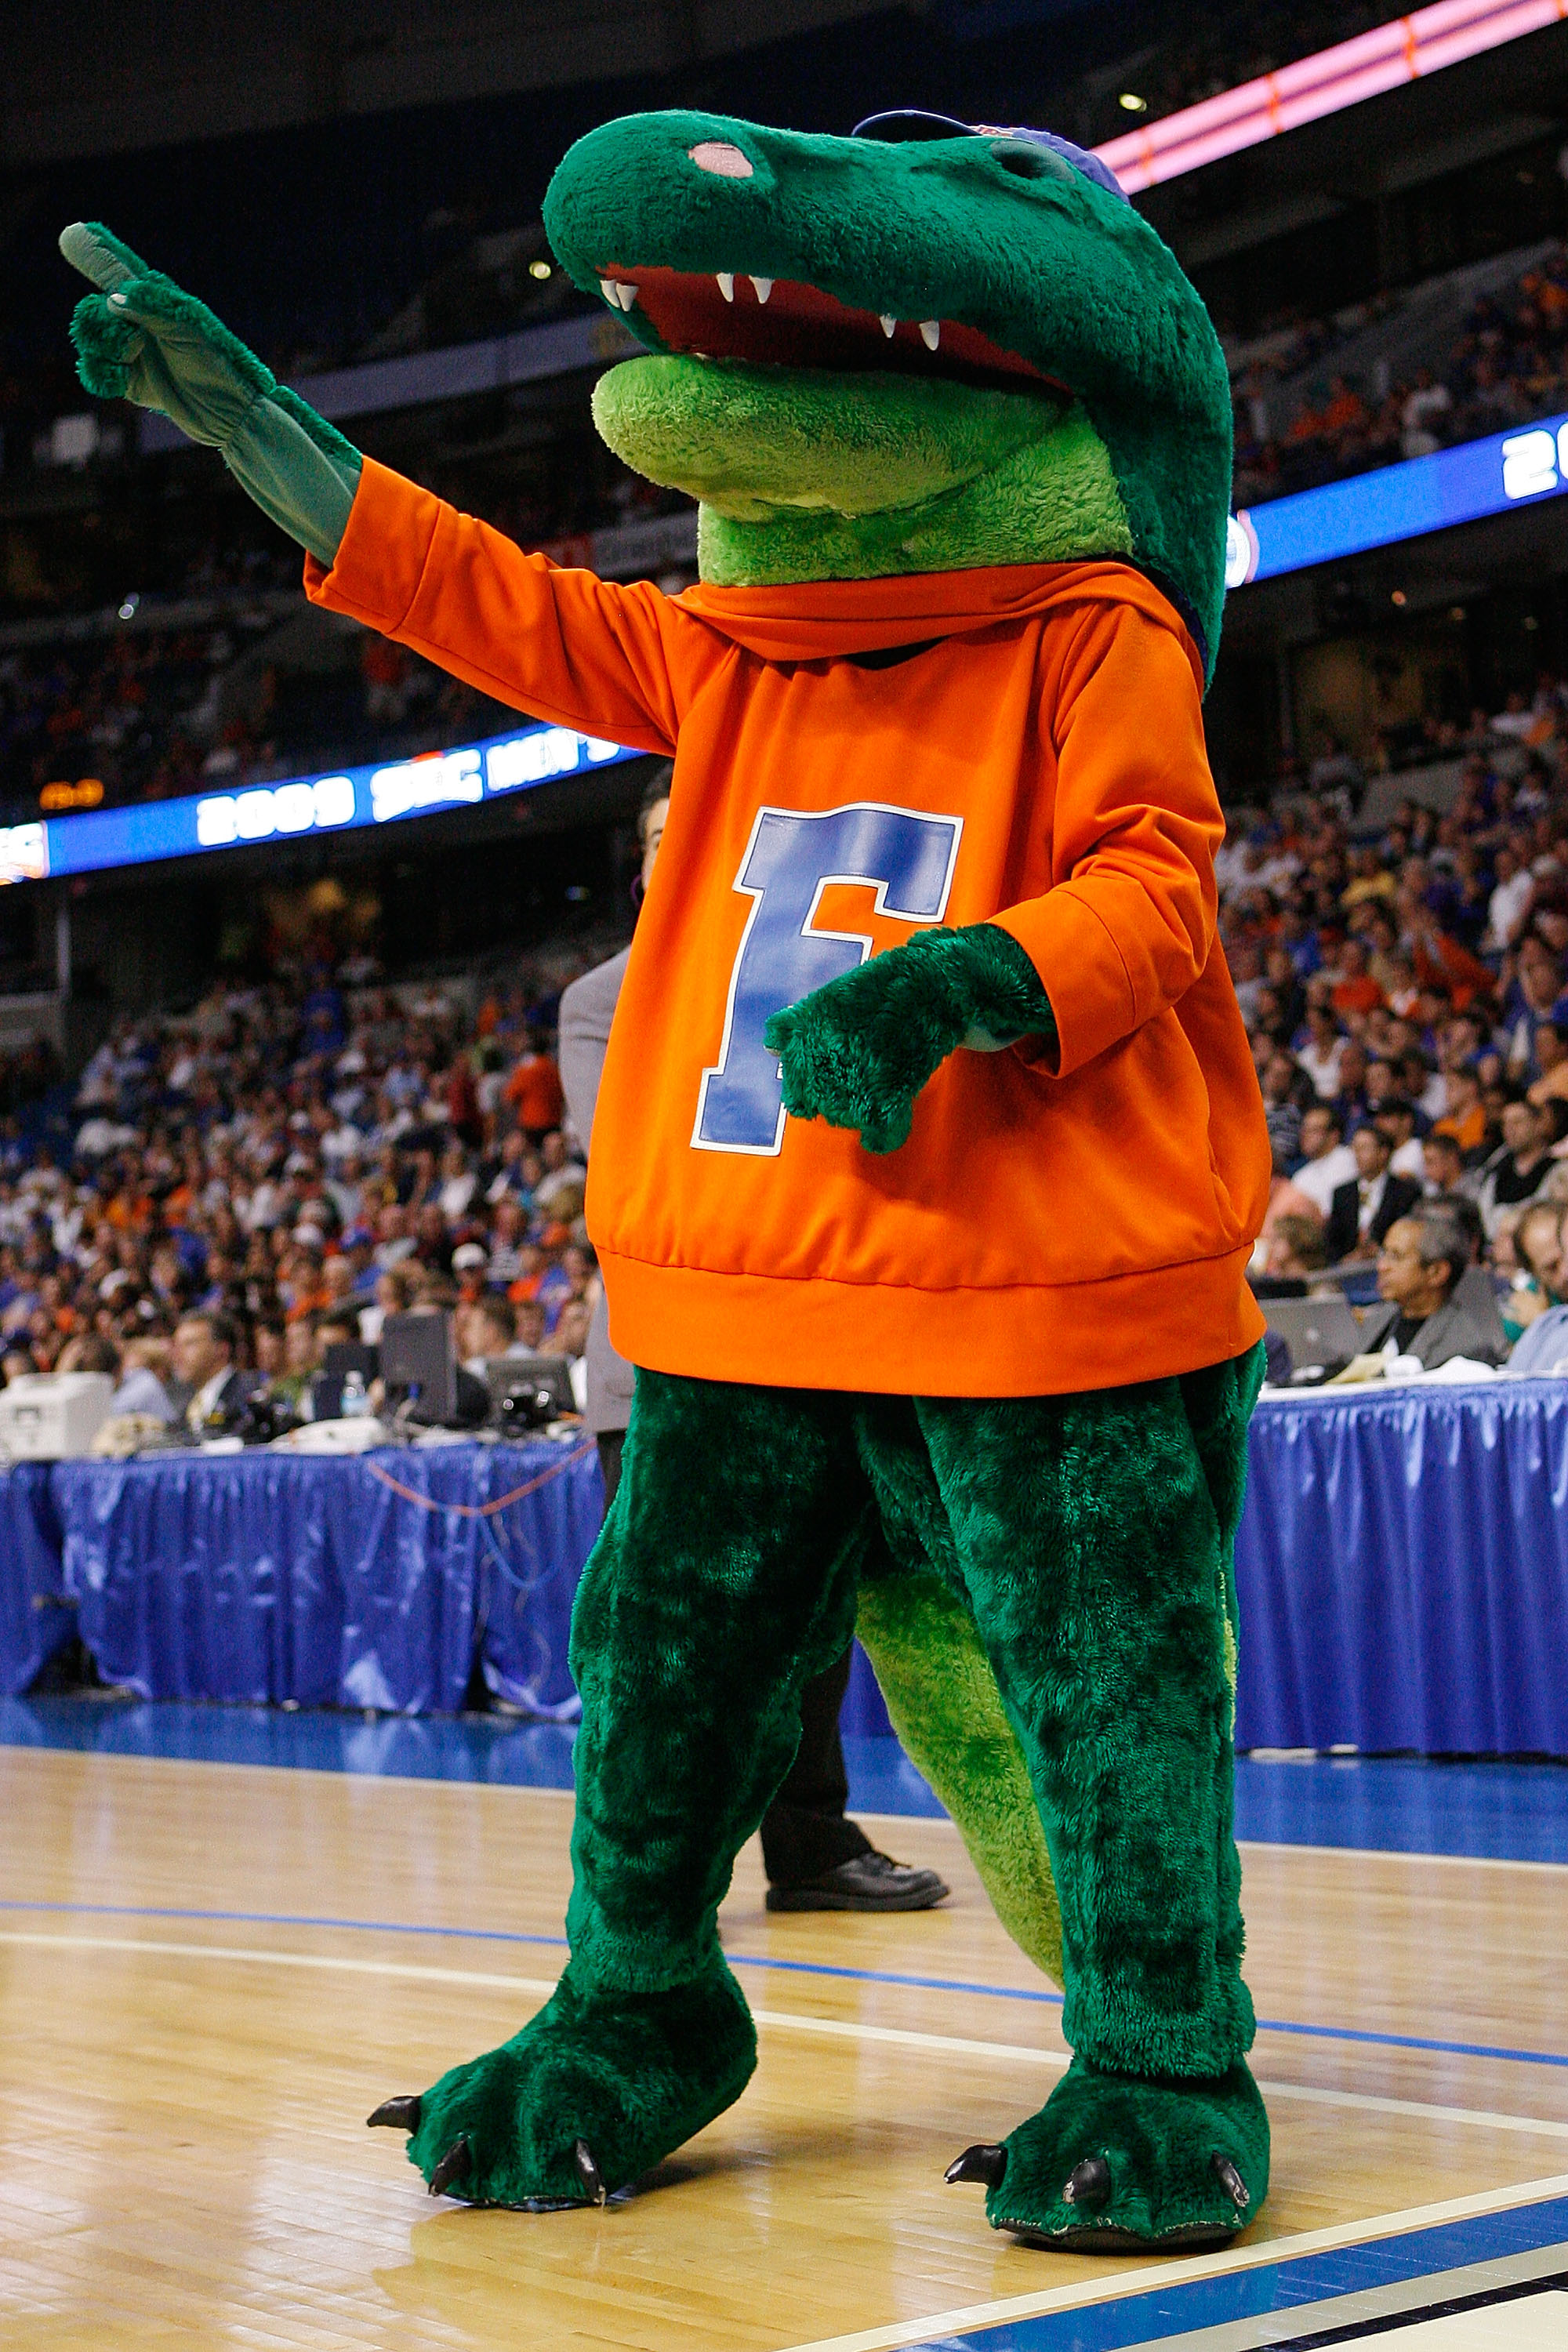 TAMPA, FL - MARCH 13:  The mascot of the Florida Gators cheers during the game against the Auburn Tigers during the quaterfinal round of the SEC Men's Basketball Tournament on March 13, 2009 at The St. Pete Times Forum in Tampa, Florida.  (Photo by Chris